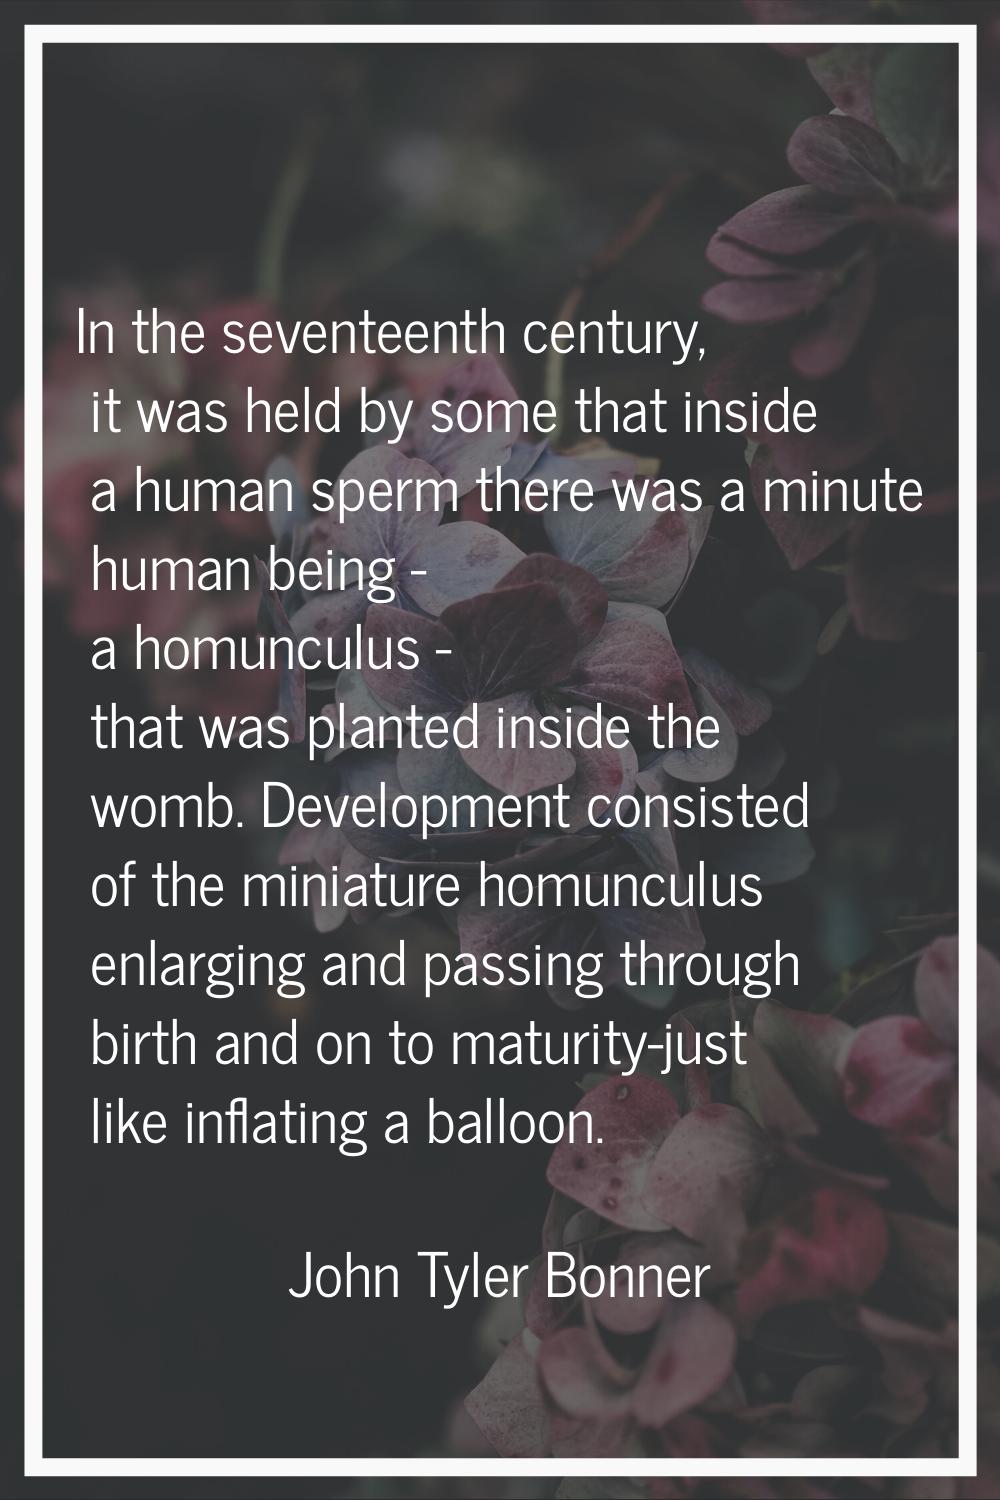 In the seventeenth century, it was held by some that inside a human sperm there was a minute human 